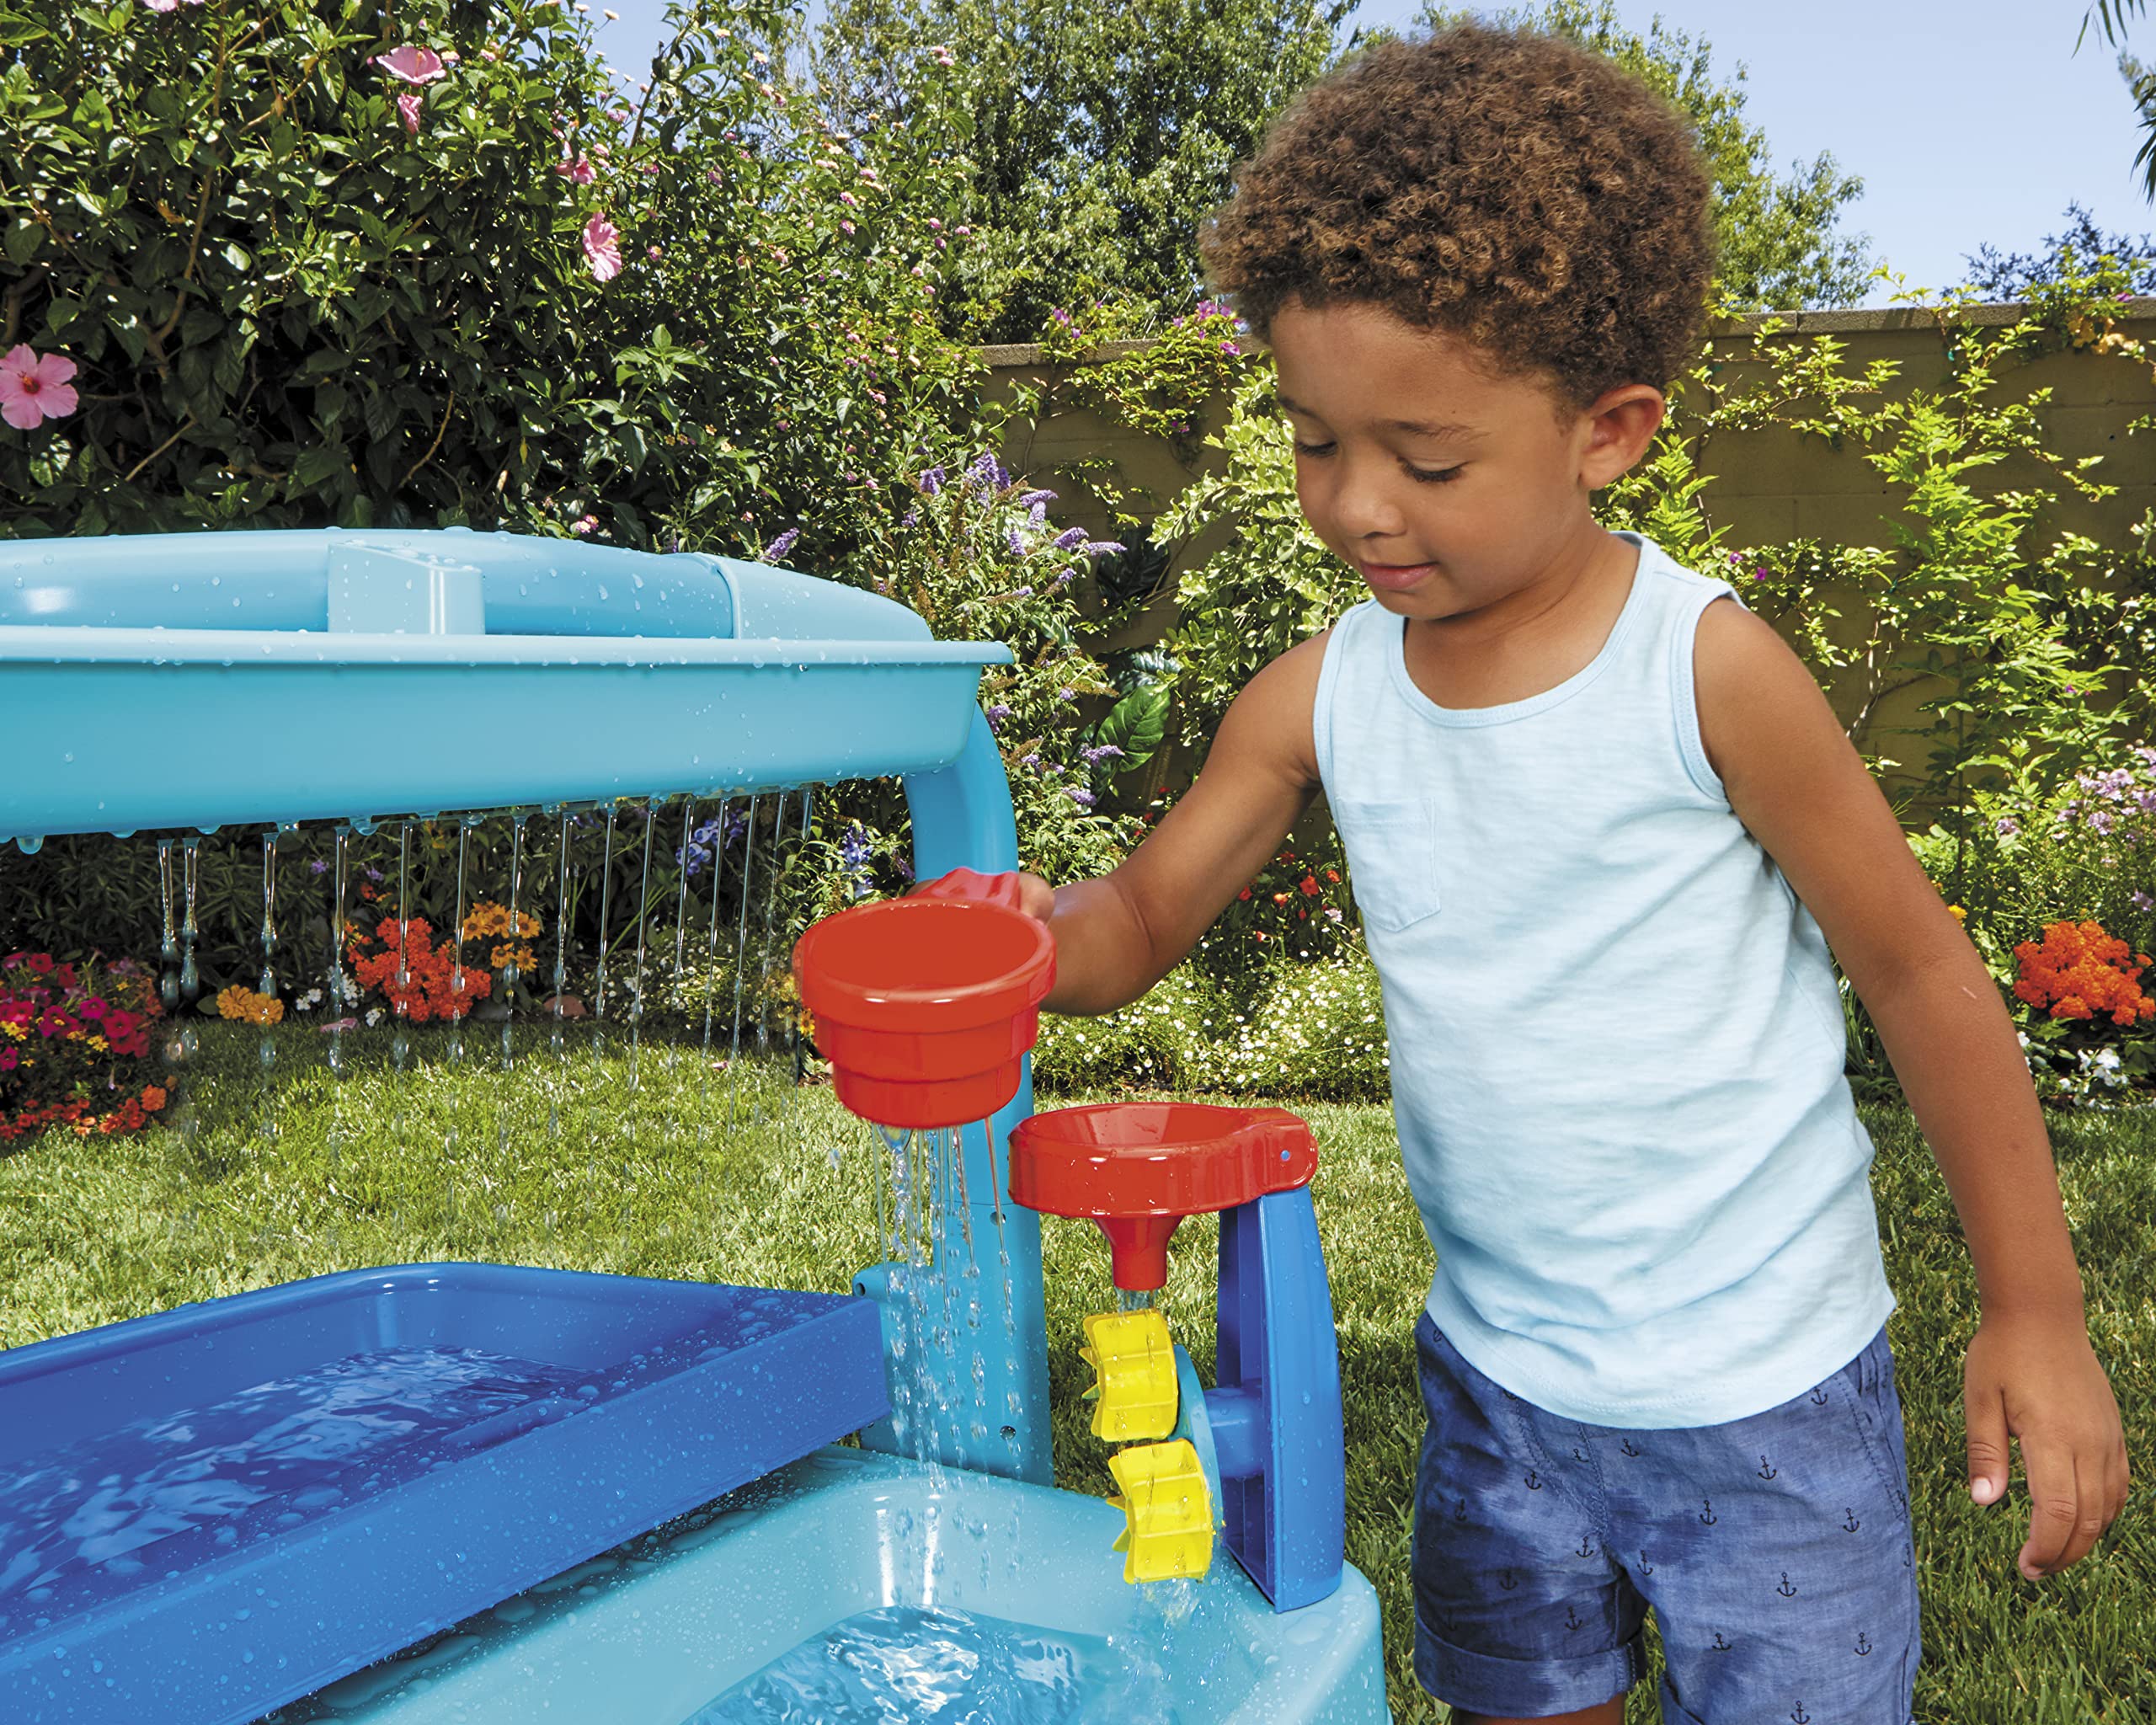 Little Tikes Easy Store Outdoor Folding Water Play Table with Accessories for Kids, Children, Boys & Girls 3+ Years, Mutlicolor, 660429C3